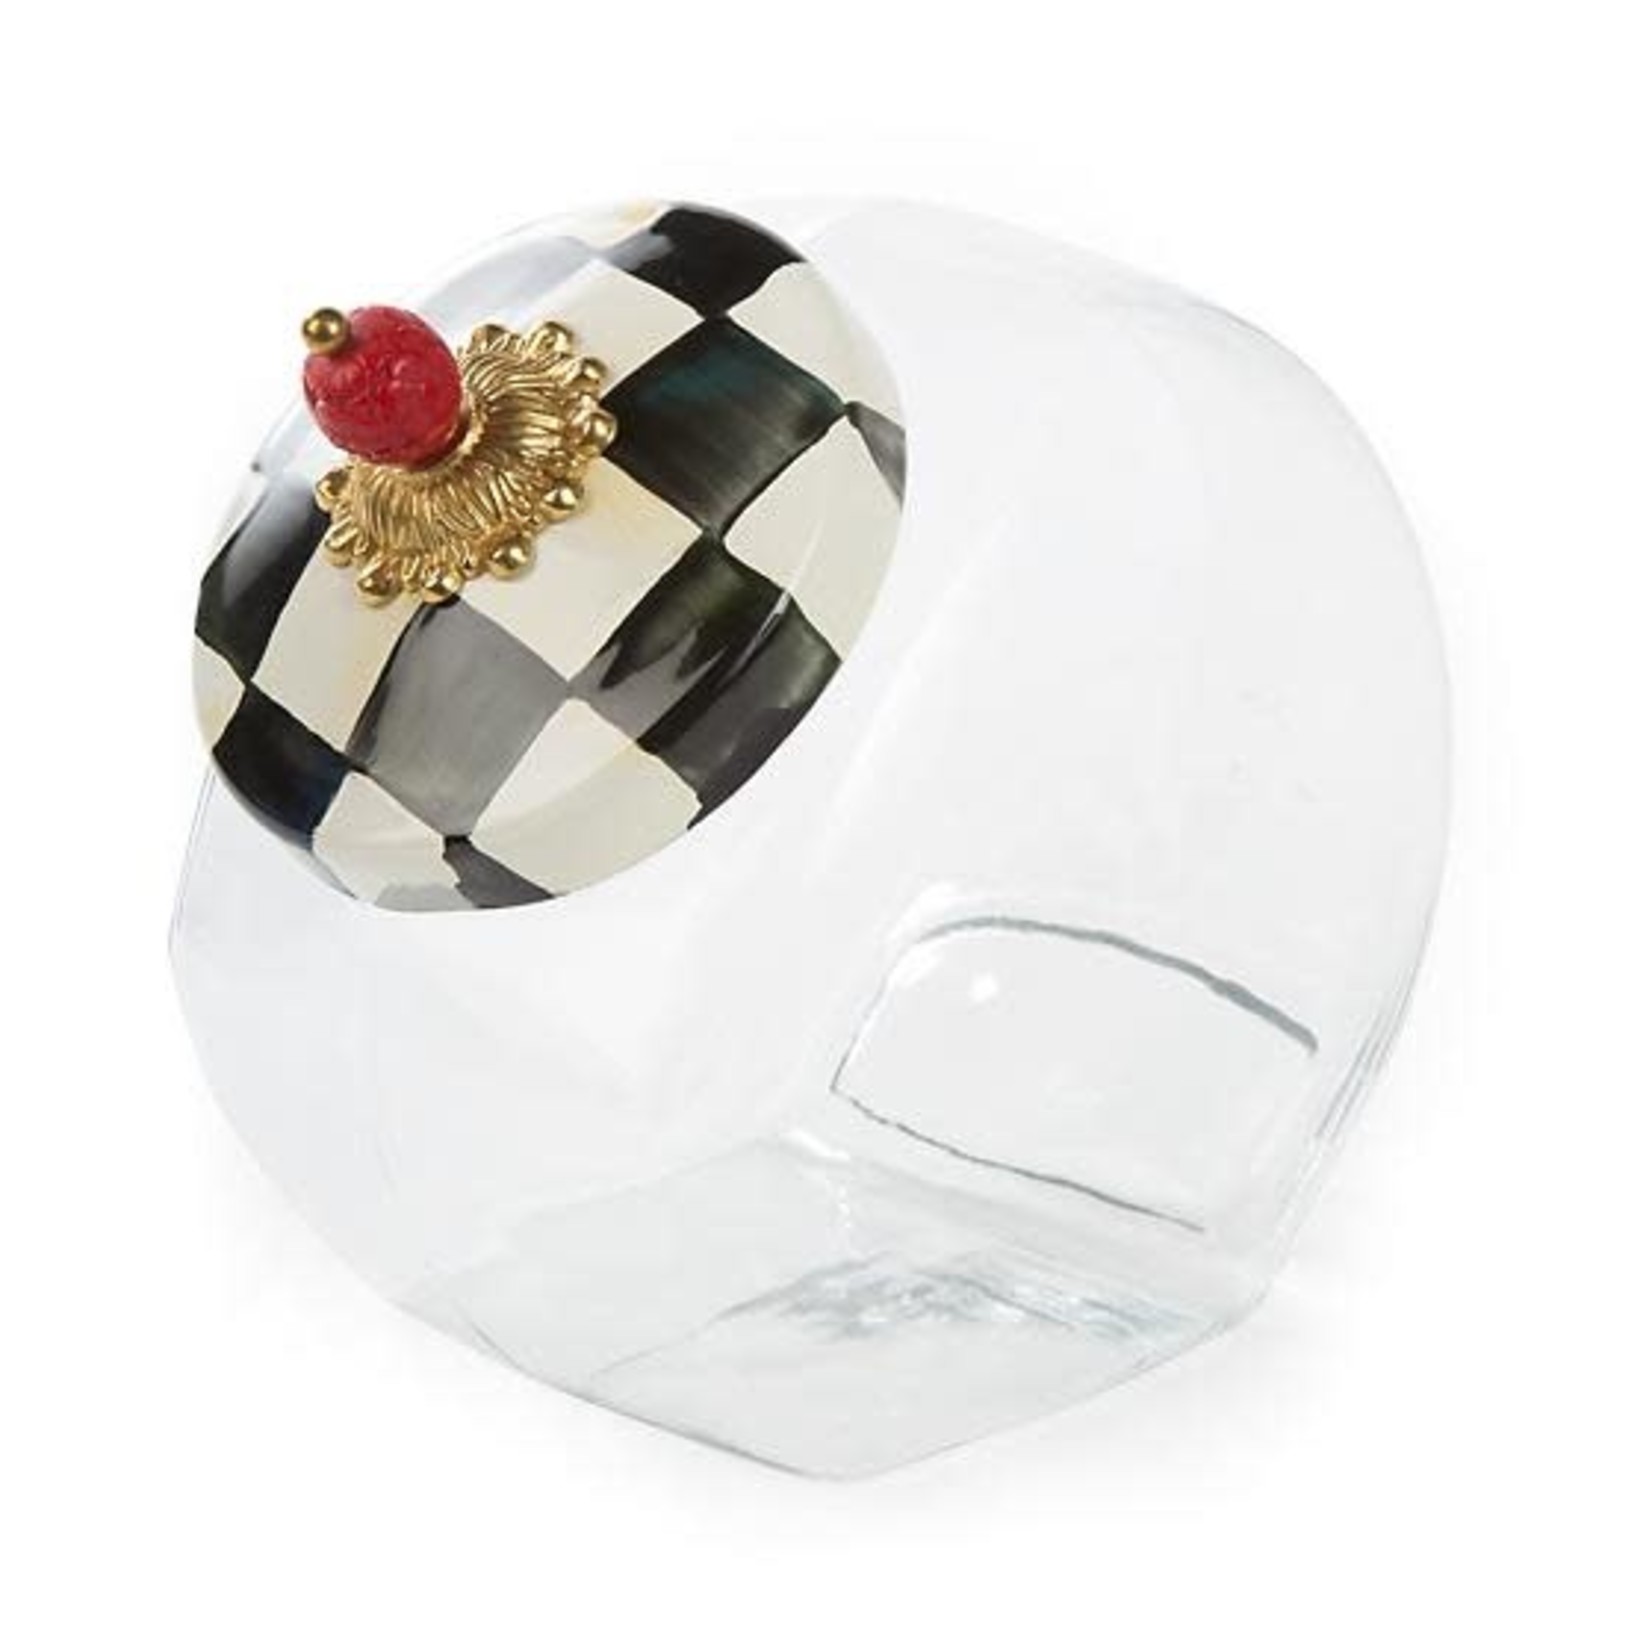 MacKenzie Childs Cookie Jar with Courtly Check Enamel Lid